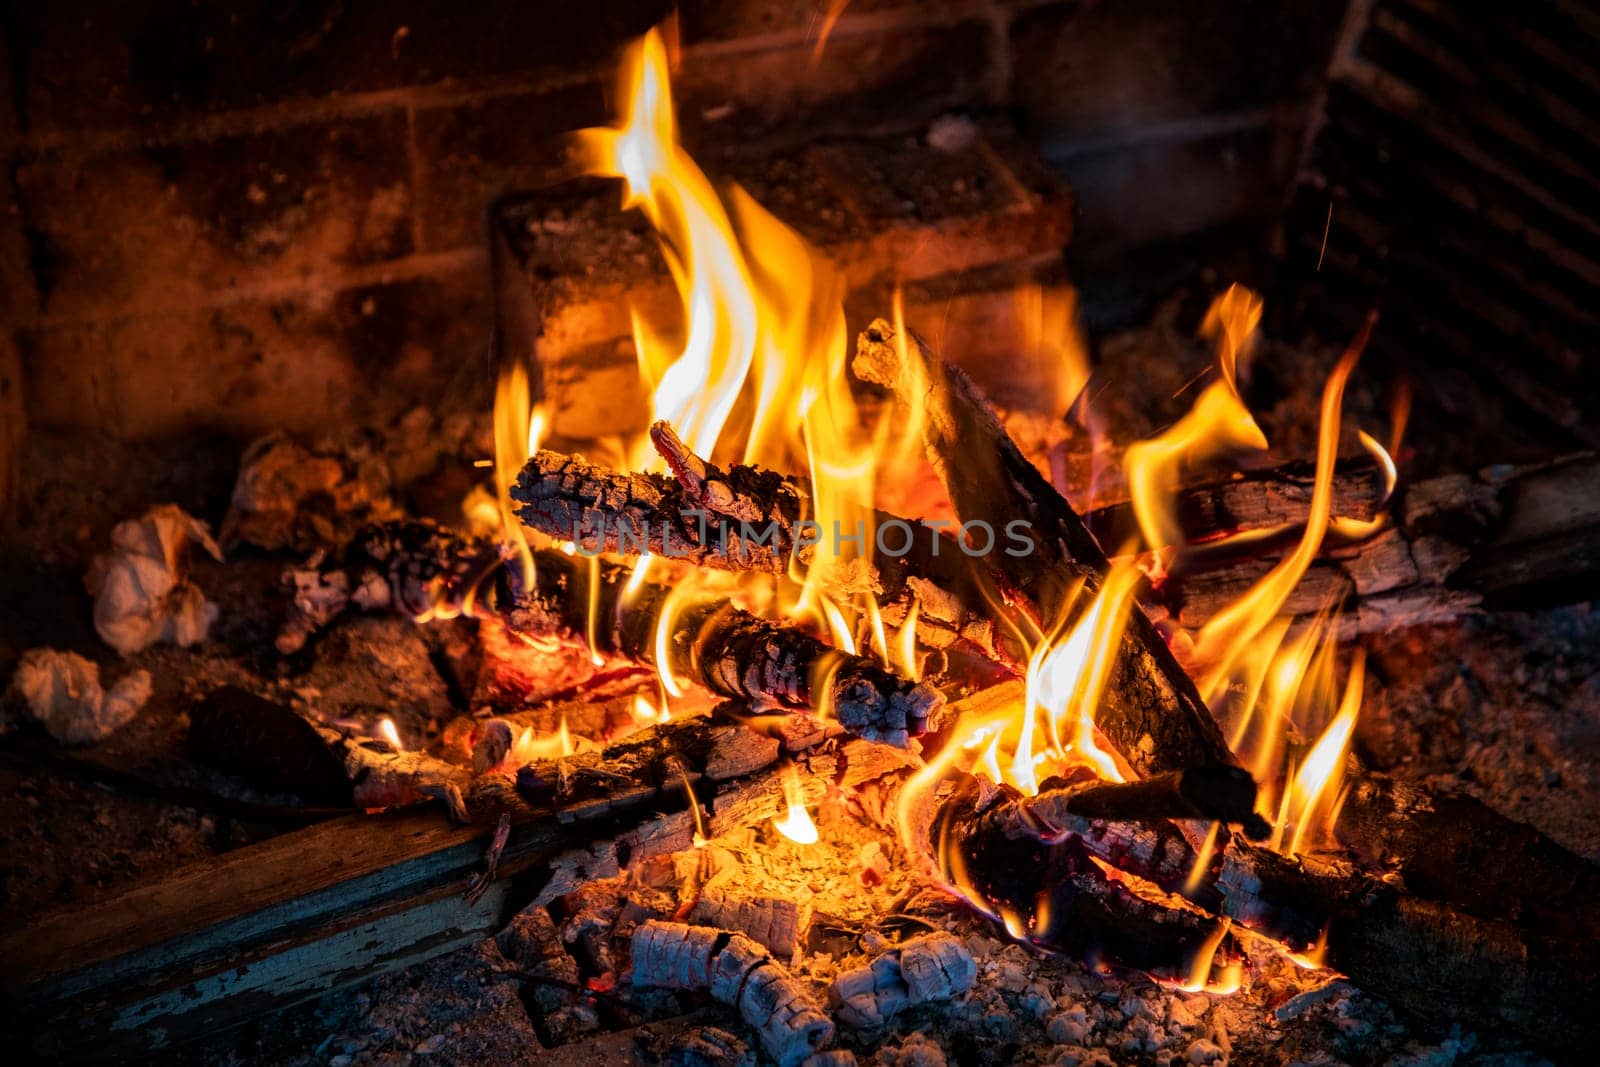 Burning firewood in a fireplace, vivid burning orange and yellow flames. by EdVal